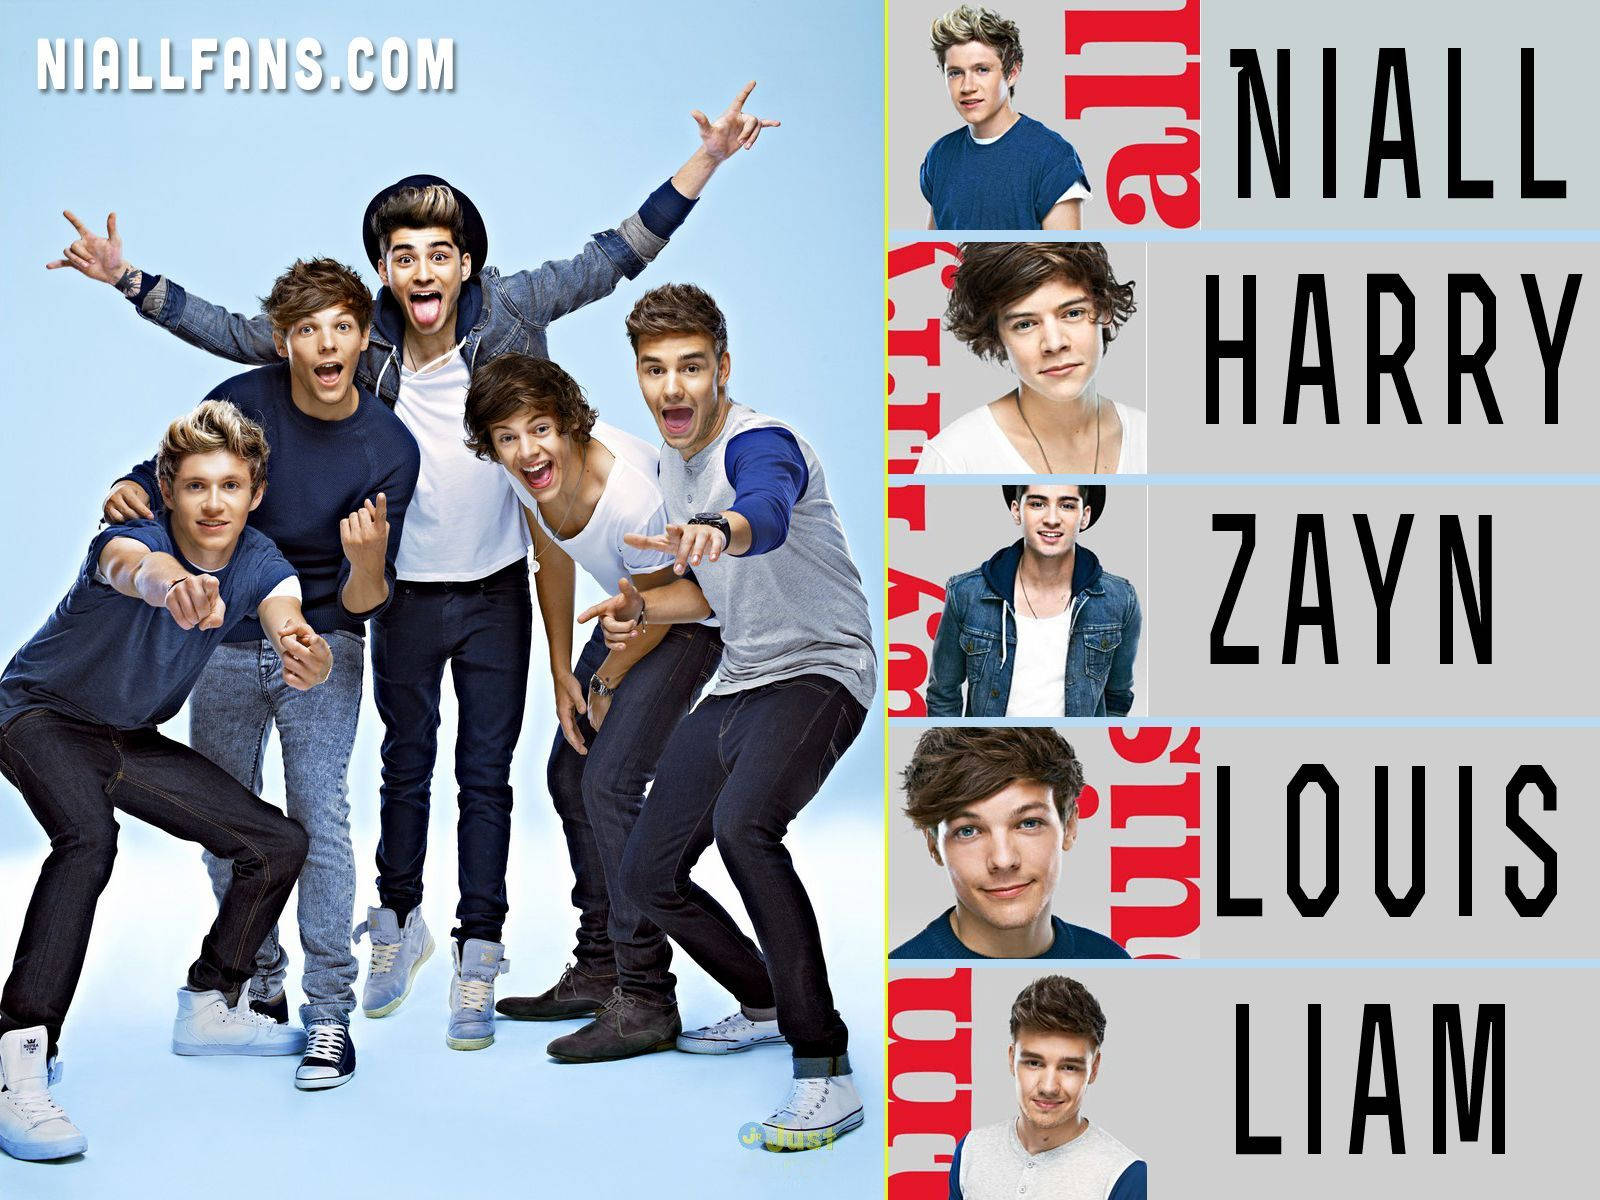 All-Star 5: One Direction’s Harry, Zayn, Louis, Niall and Liam Wallpaper